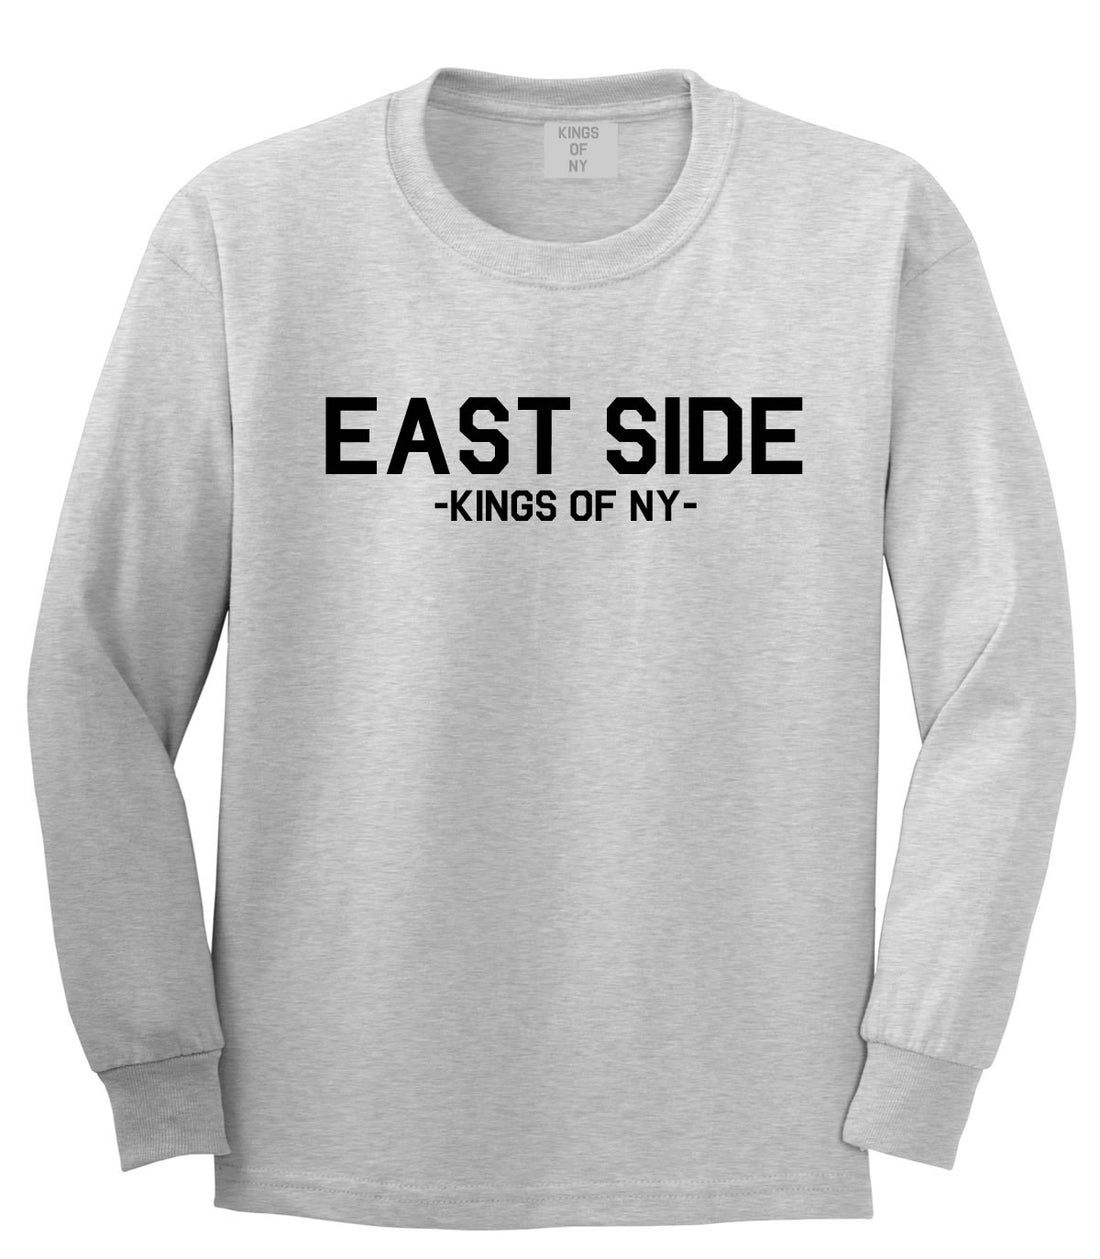 East Side NYC New York Long Sleeve T-Shirt in Grey